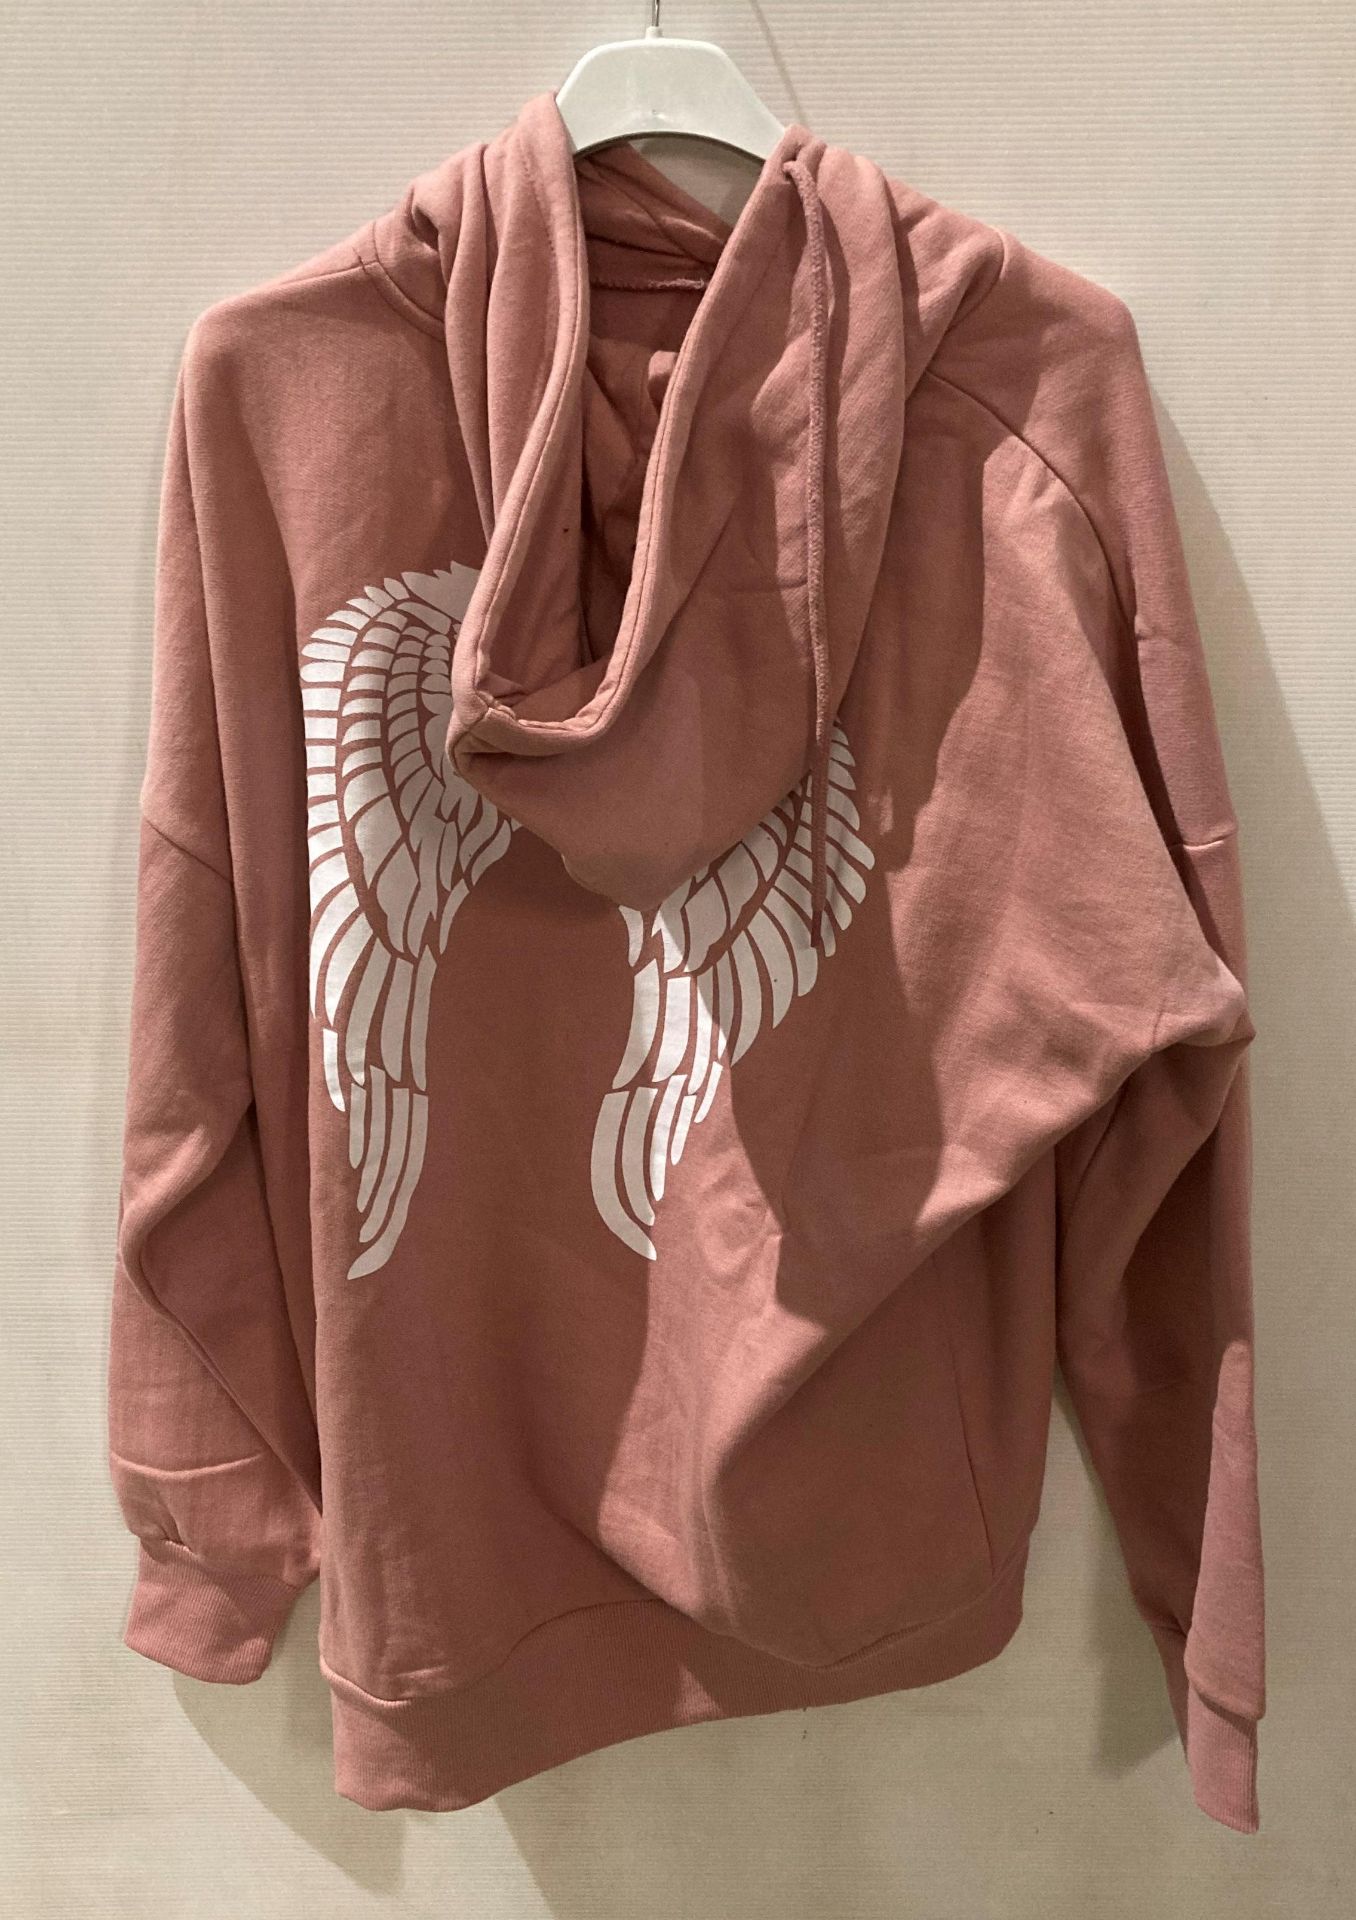 11 x GQ (Gypsy Queen) pink hoodies with angel wing print to back, - Image 2 of 2